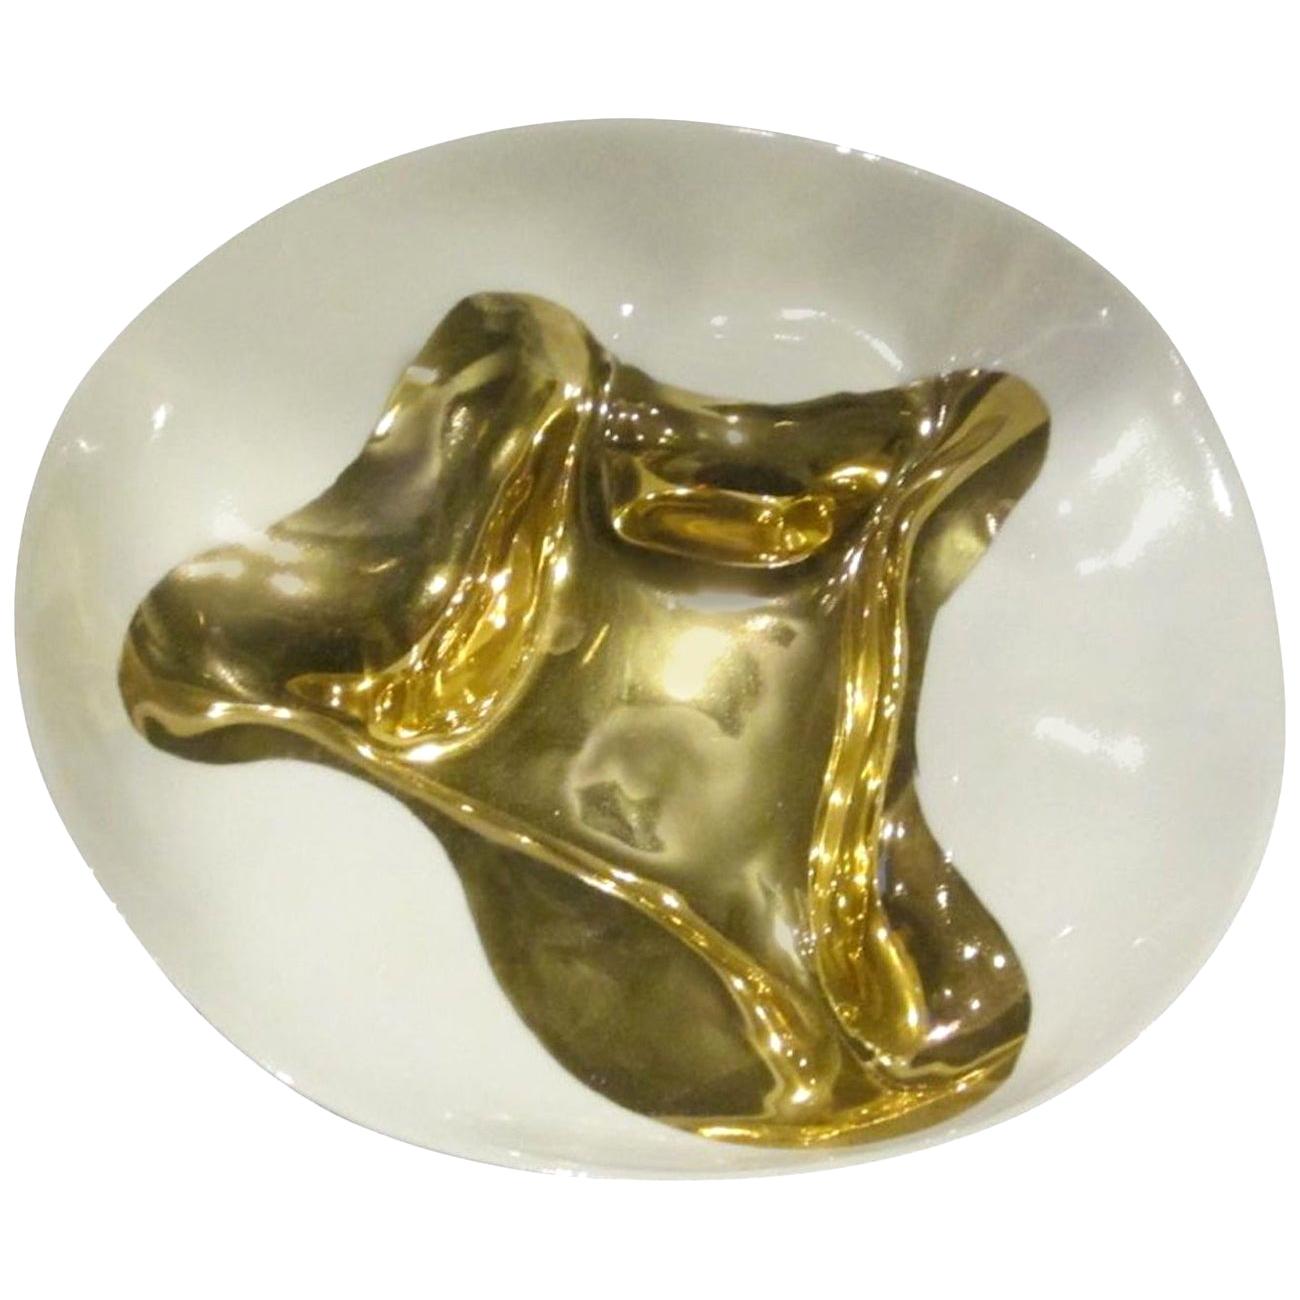 Gold Leaf Flame Design Organic Shape Small Bowl, Italy, Contemporary